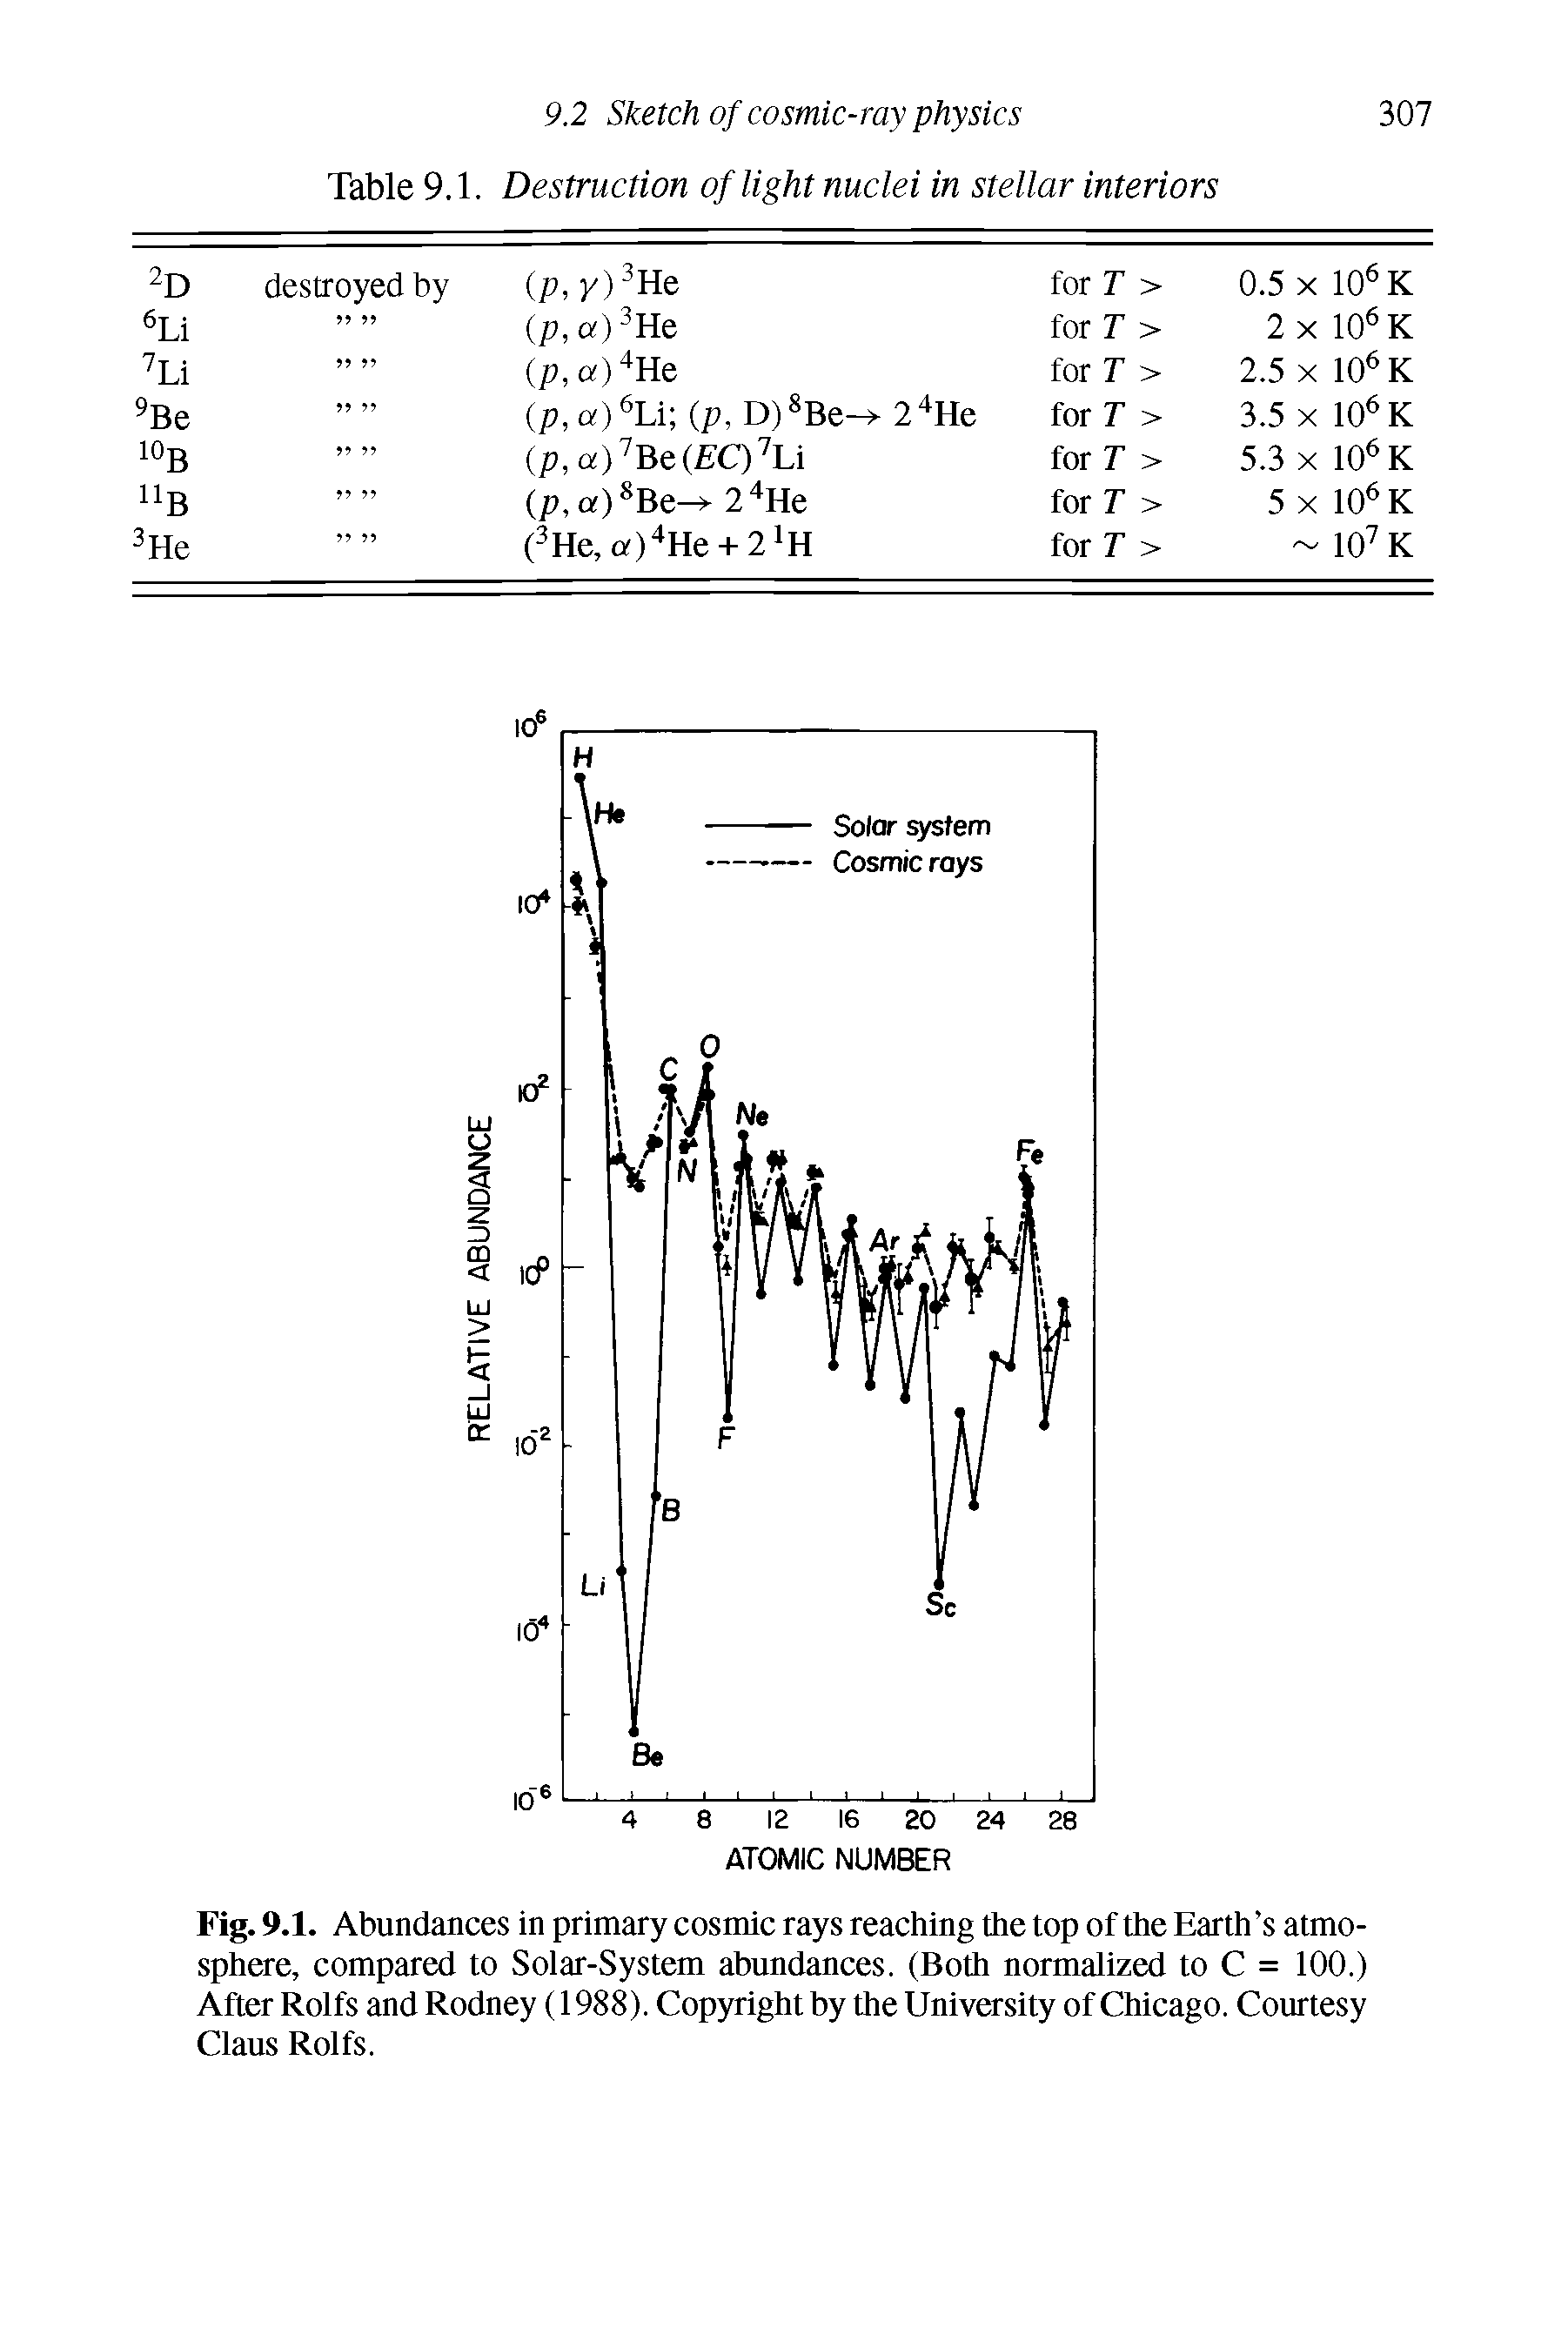 Fig. 9.1. Abundances in primary cosmic rays reaching the top of the Earth s atmosphere, compared to Solar-System abundances. (Both normalized to C = 100.) After Rolfs and Rodney (1988). Copyright by the University of Chicago. Courtesy Claus Rolfs.